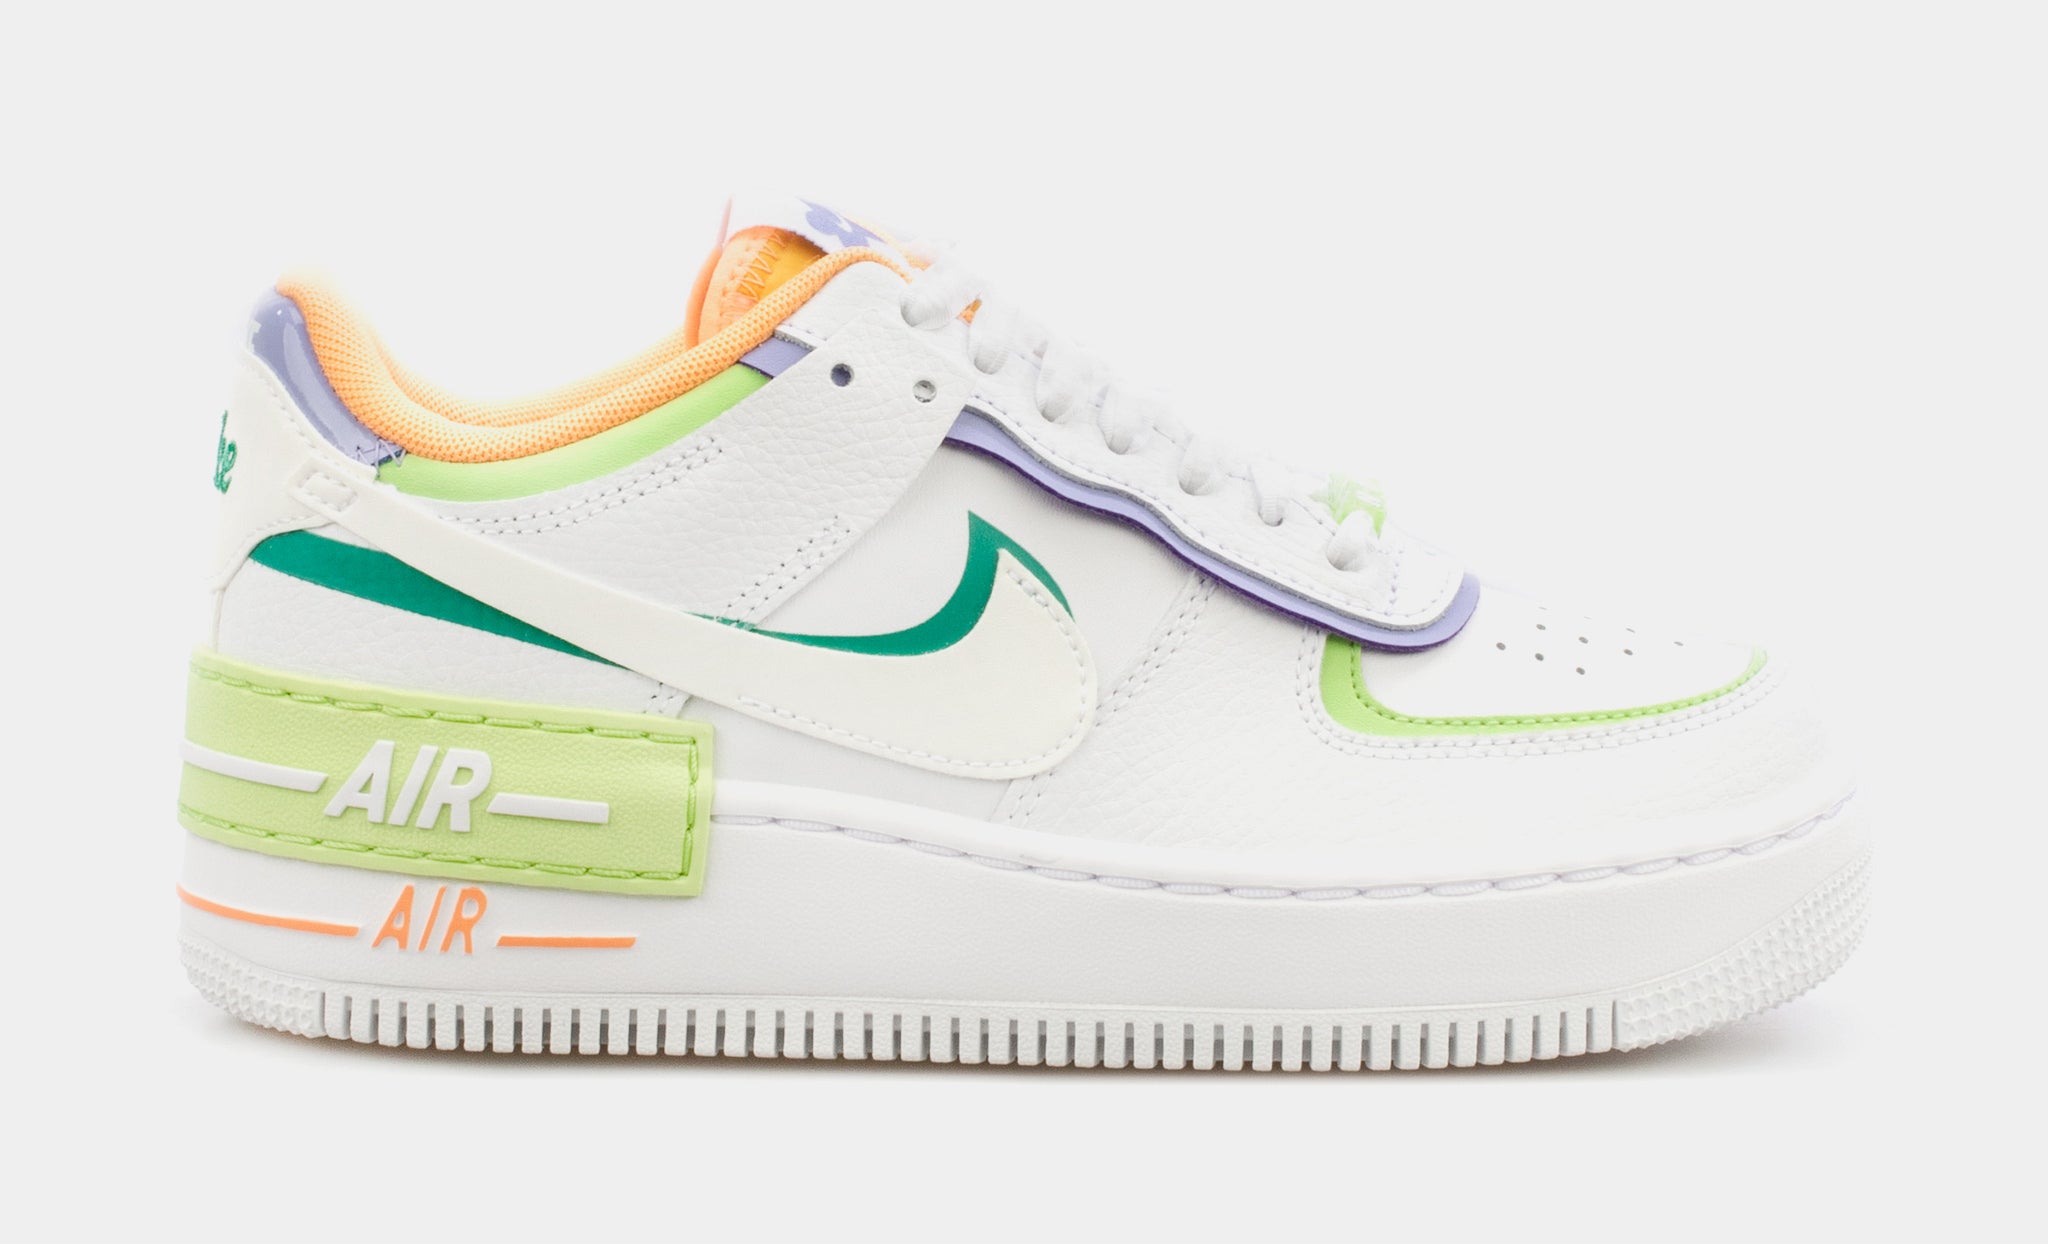 Nike Air Force 1 Shadow Sneakers in White